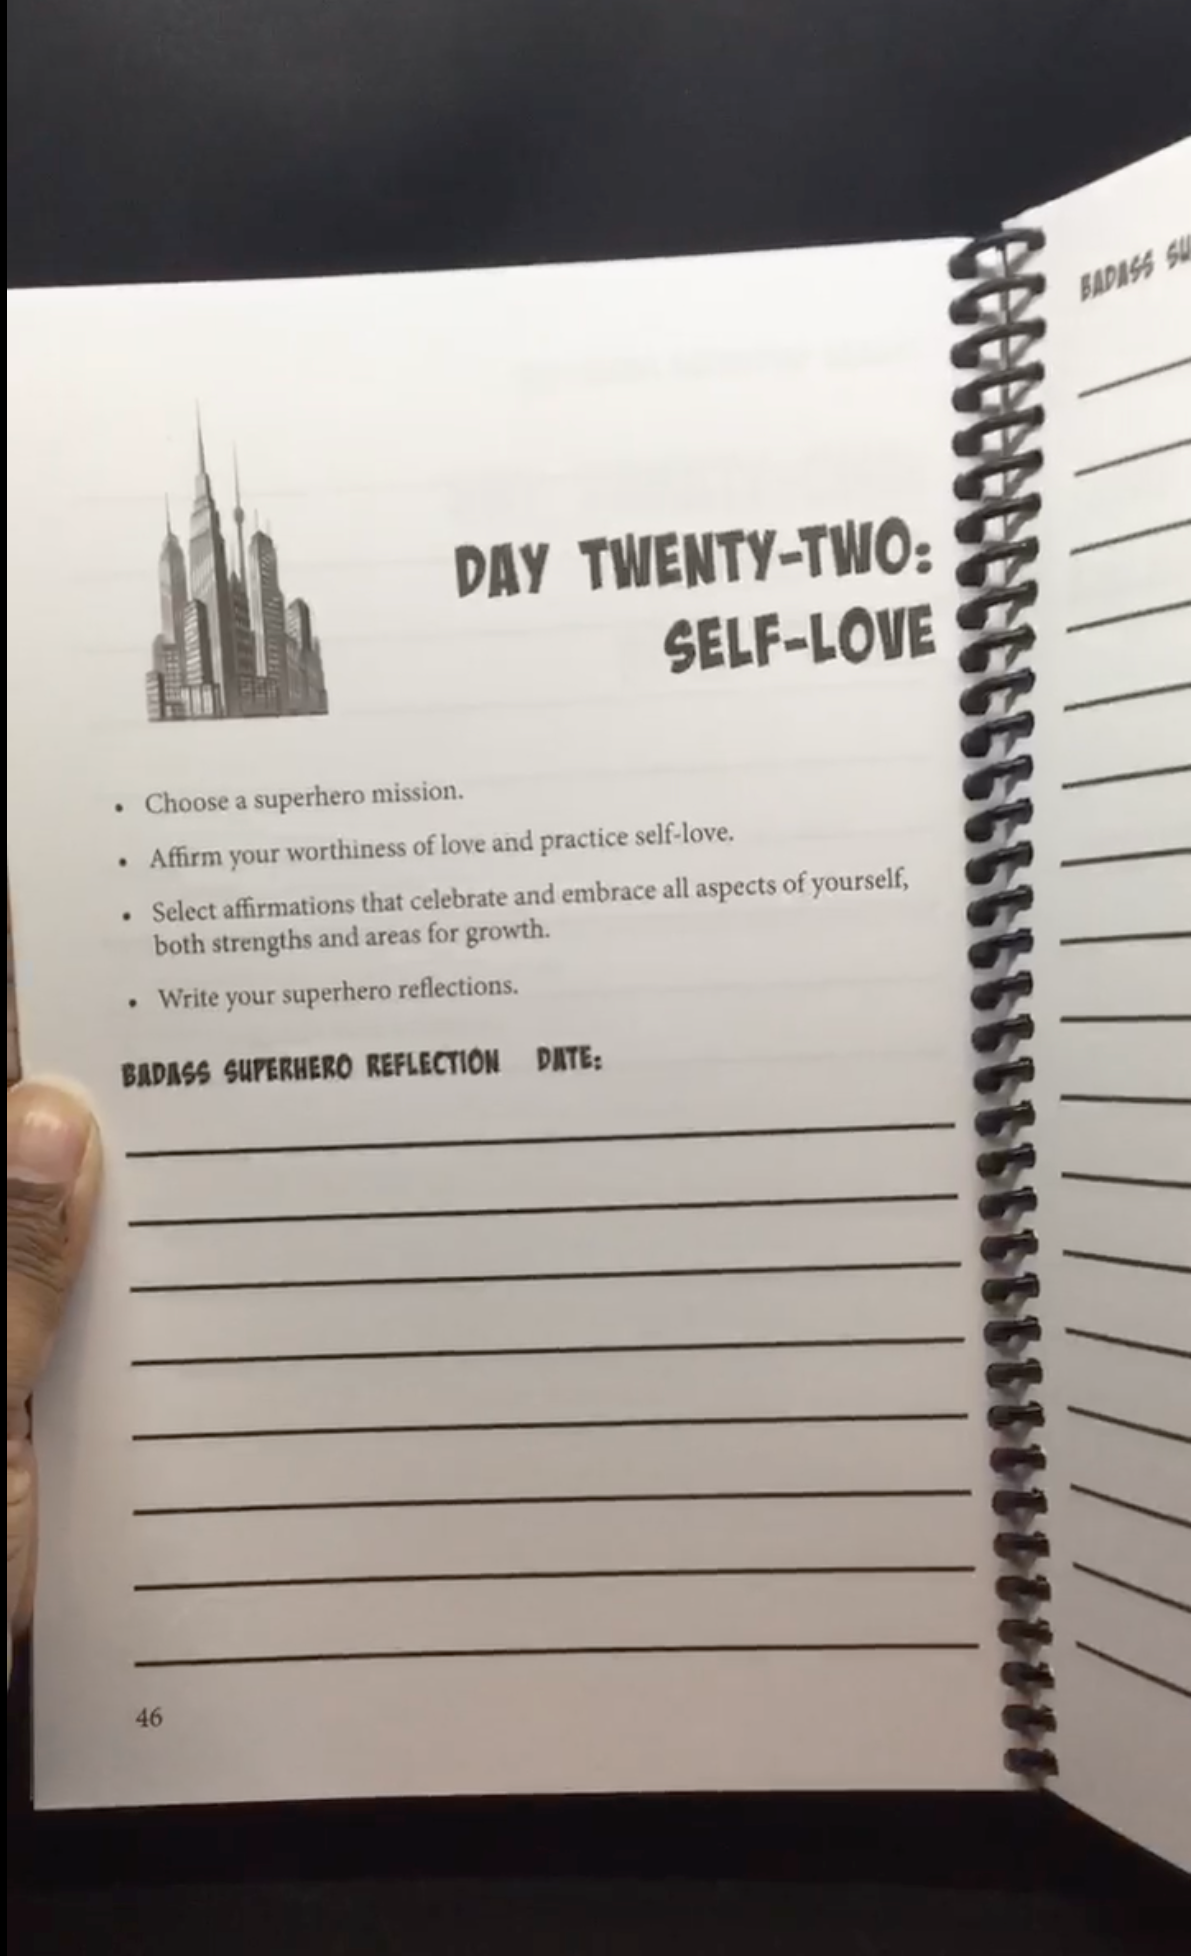 Sample Exercise in Companion Workbook for 101 Badass Superhero Affirmations